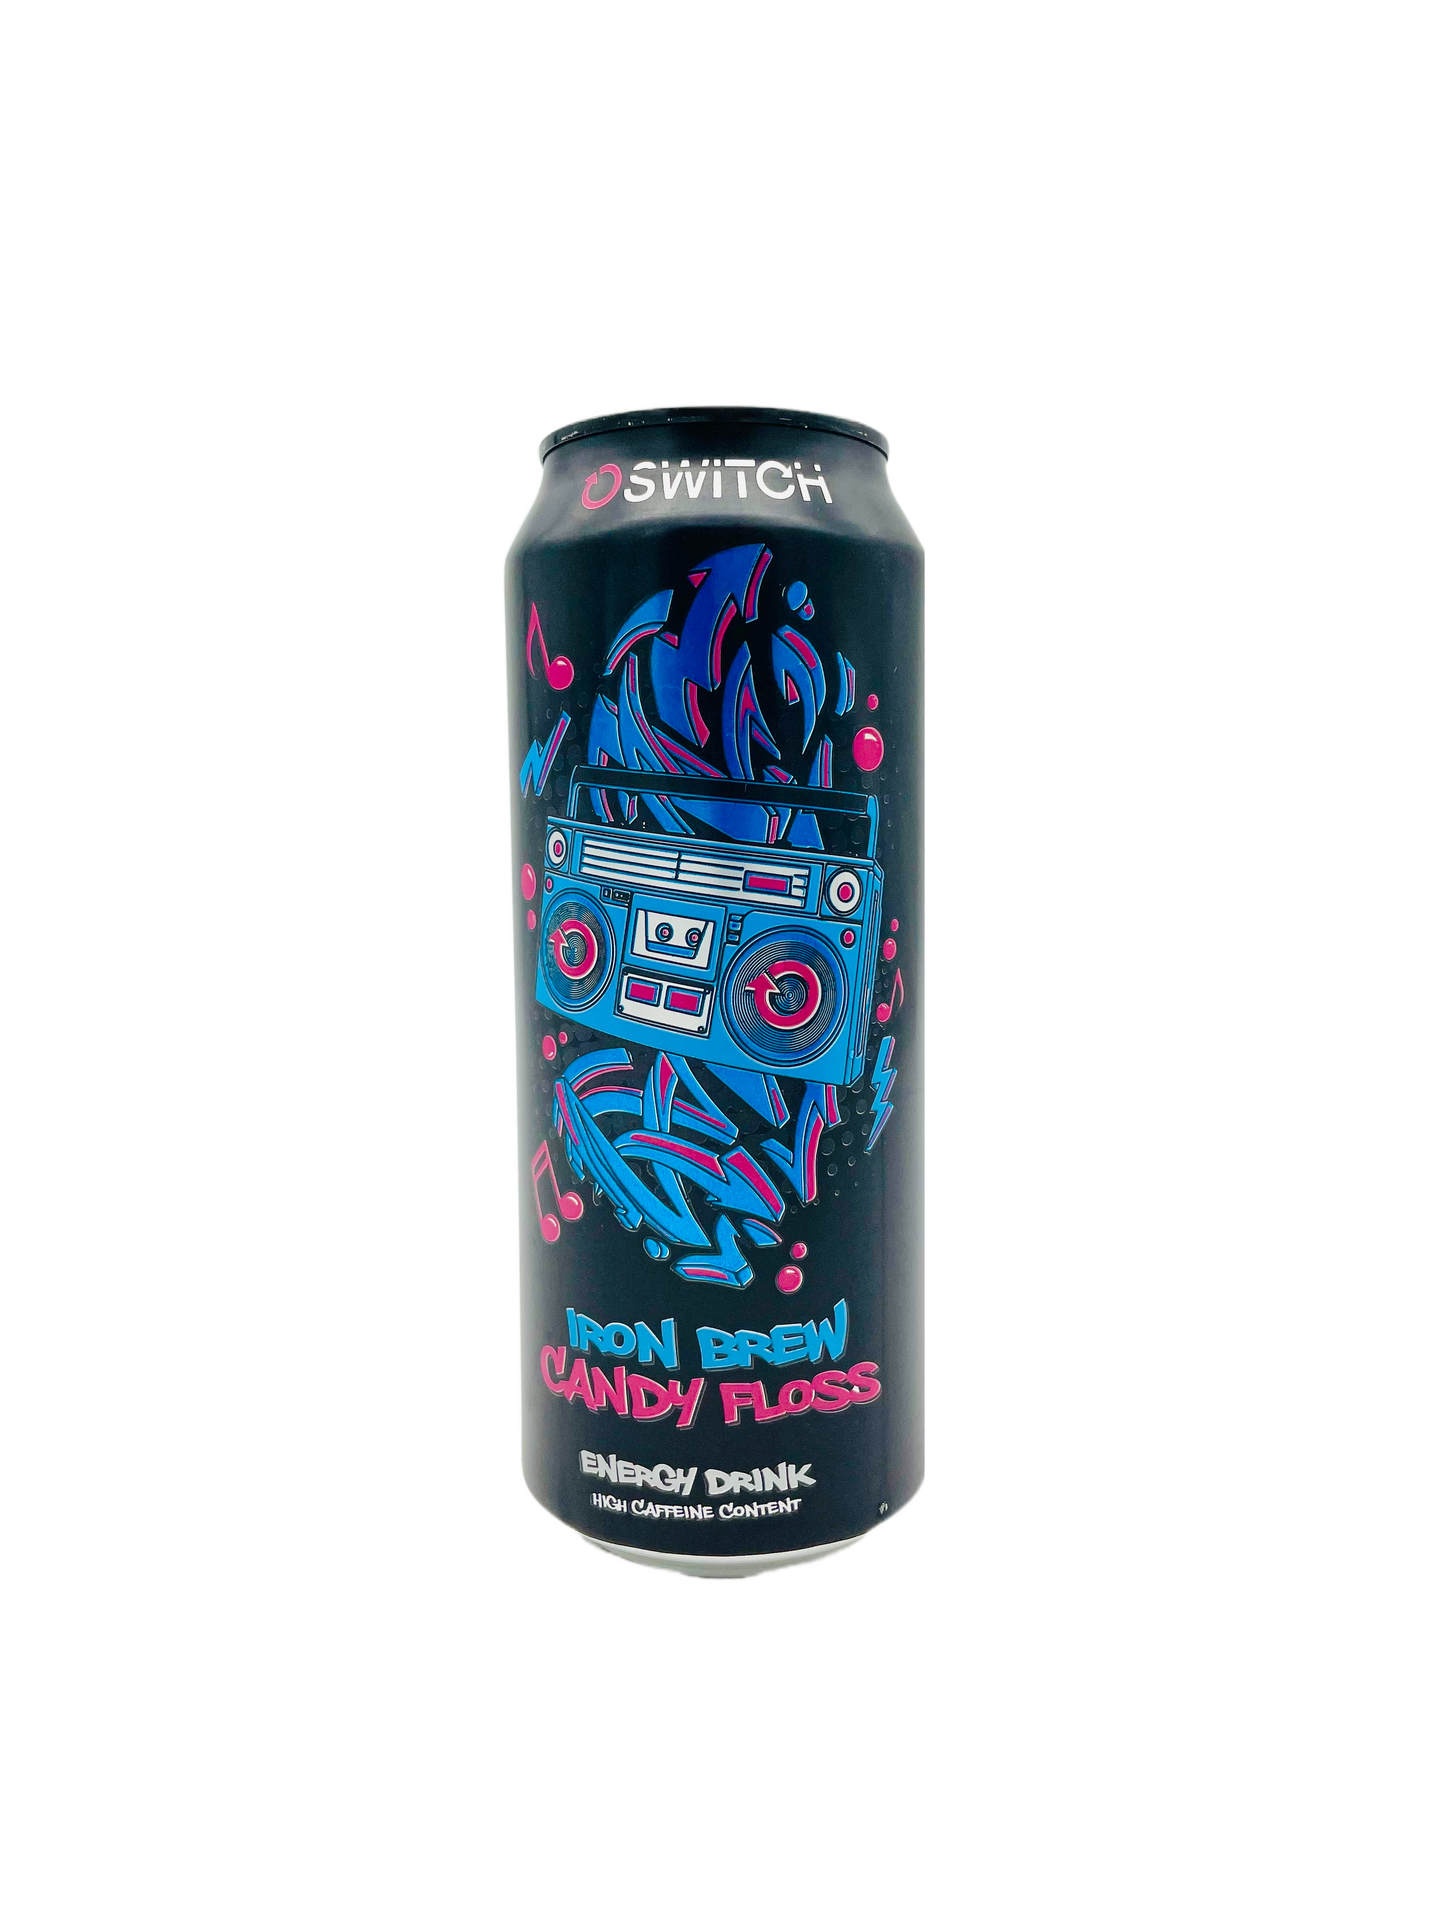 Switch Iron Brew Candy Floss Energy Drink 500ml